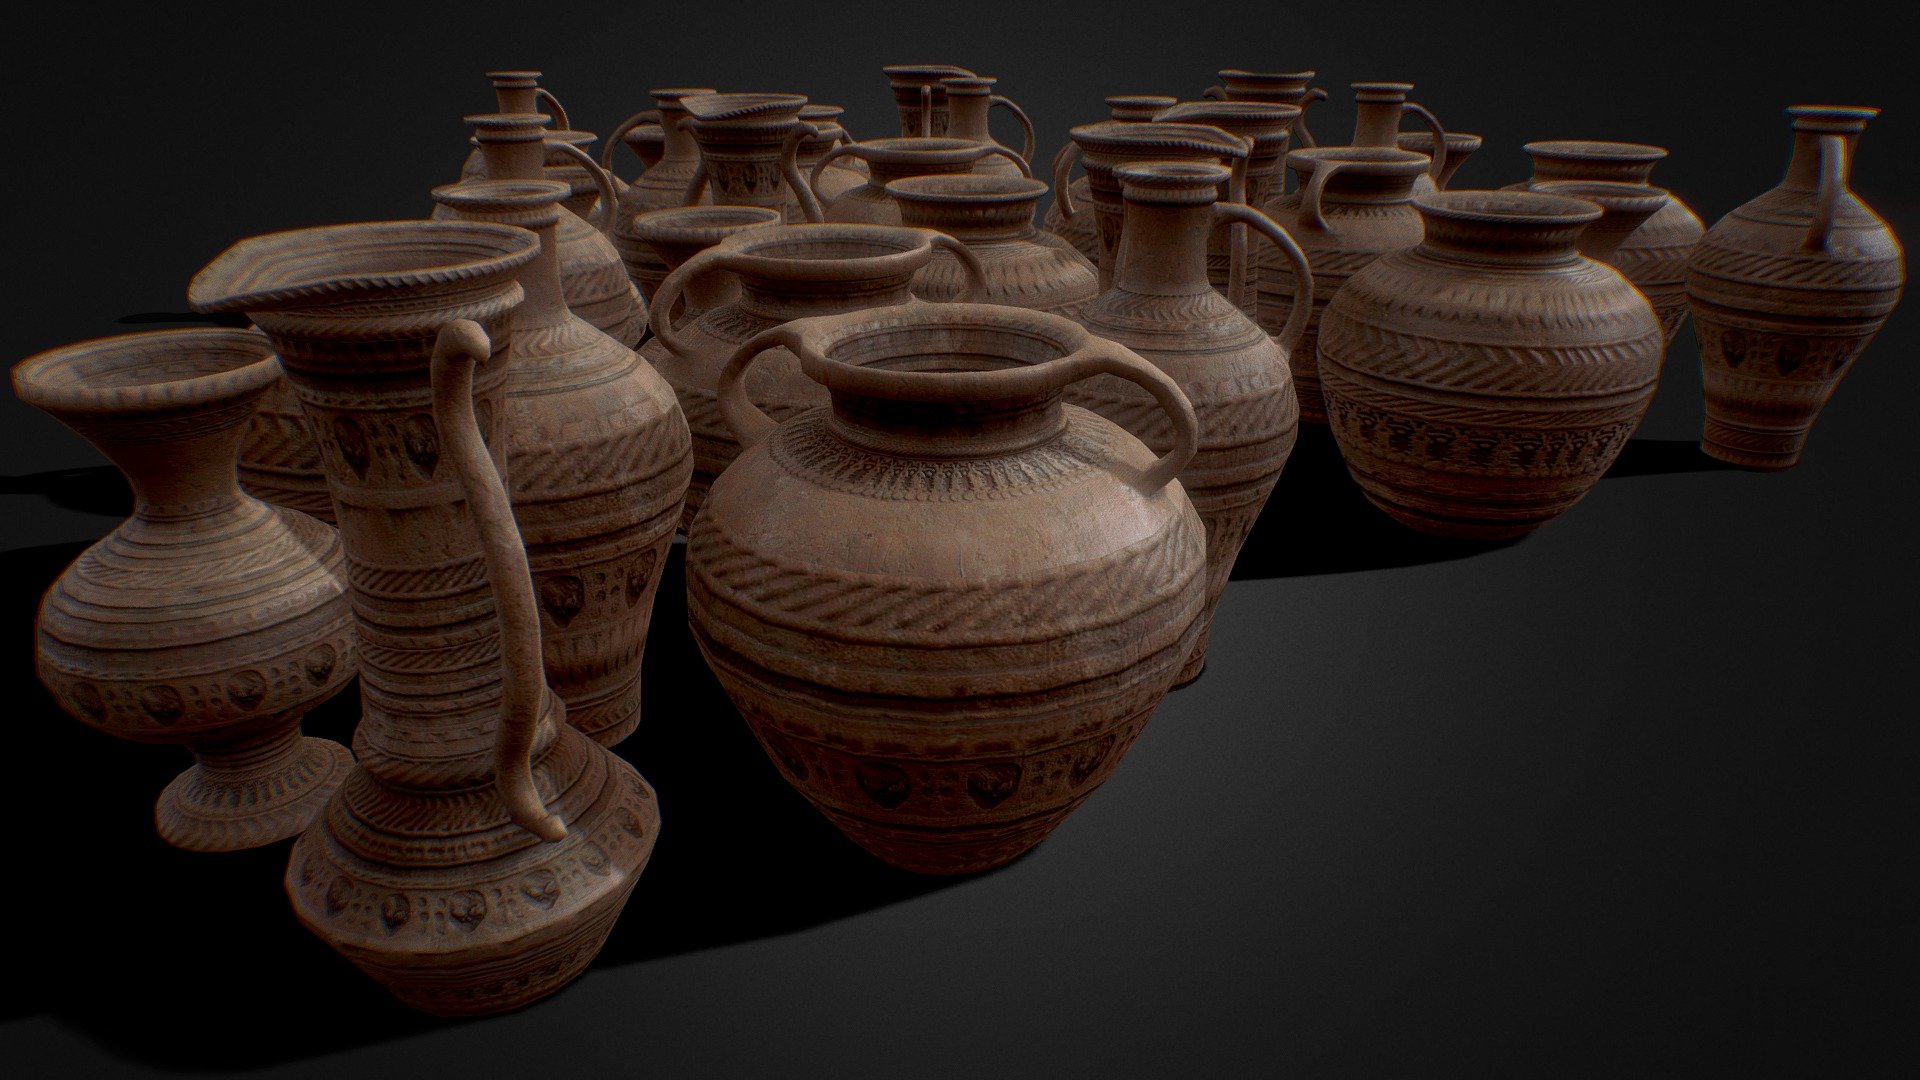 / Old Vases props

/texture type &gt; trim texture

/texture quality &gt; 2048x2048

/you can increase the quality of the prop by placing normal detail texture for a better view, it is included

/contains 5 different props

/ready for game engines

/textures included: NORMAL-ALBEDO1-ALBEDO2-ROUGHNESS-AO-DETAIL NORMAL - Old Vases - Buy Royalty Free 3D model by highraion 3d model